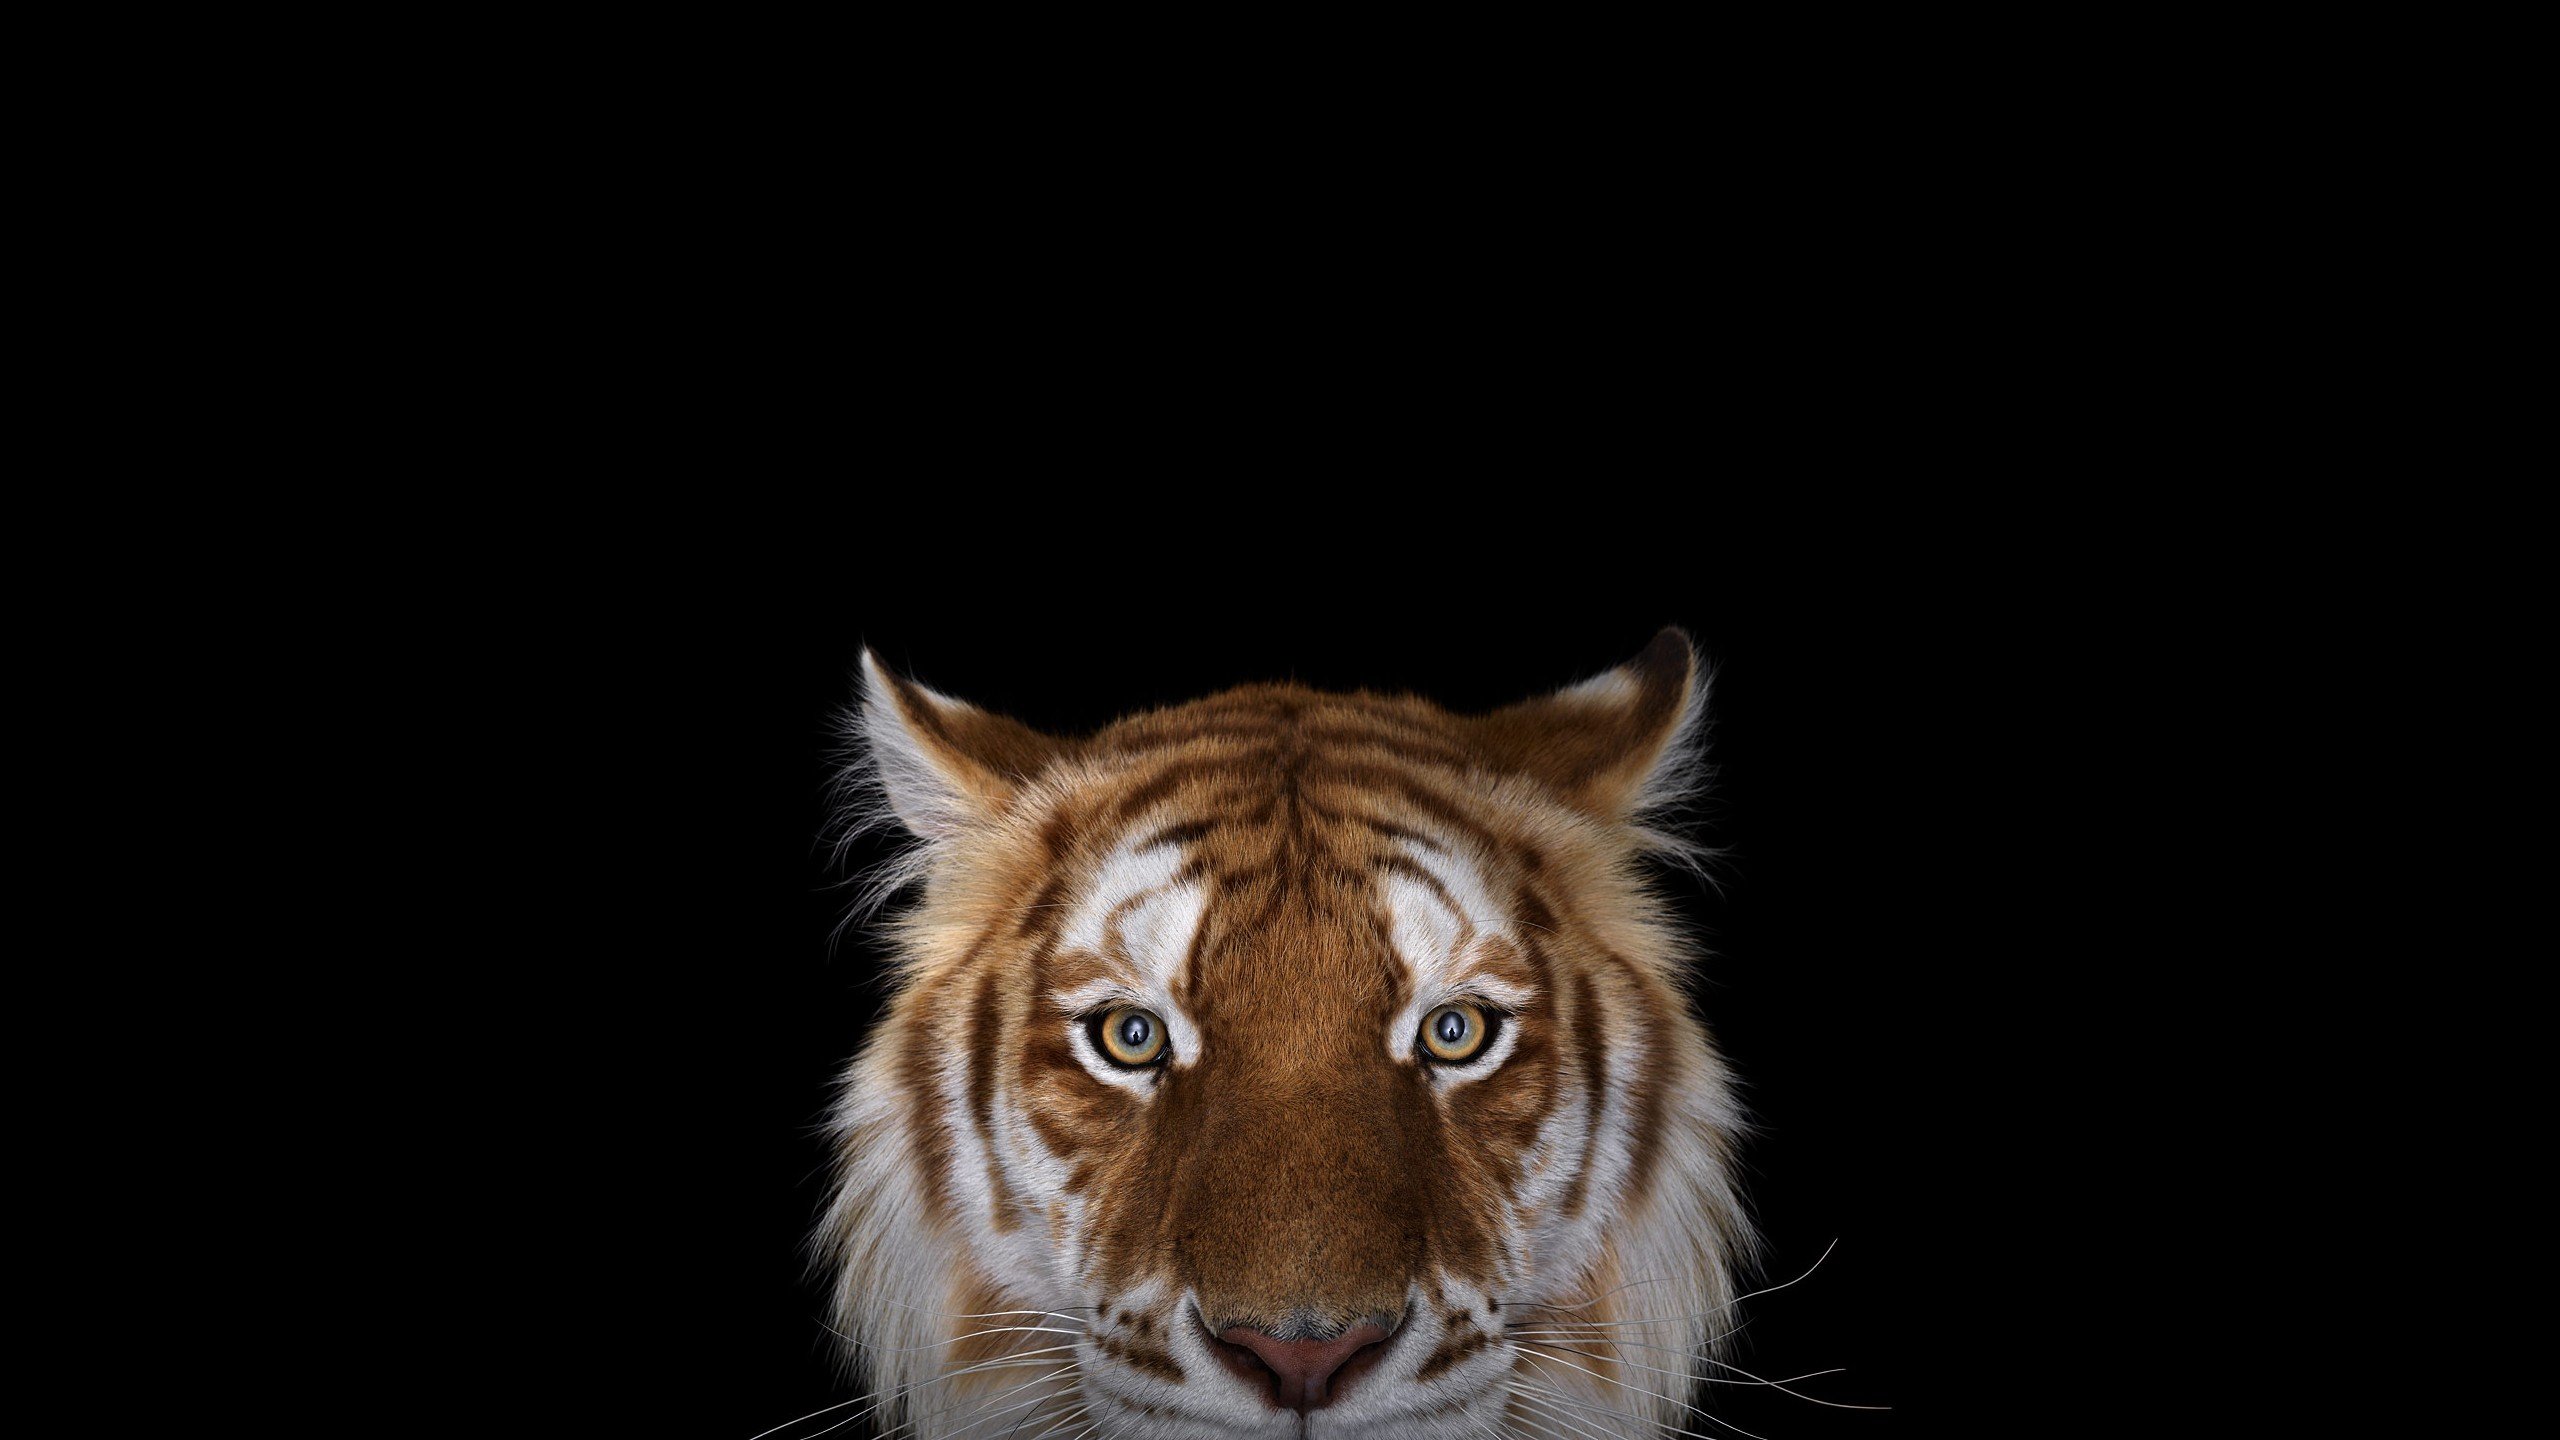 photography, Tiger, Simple background, Big cats Wallpaper